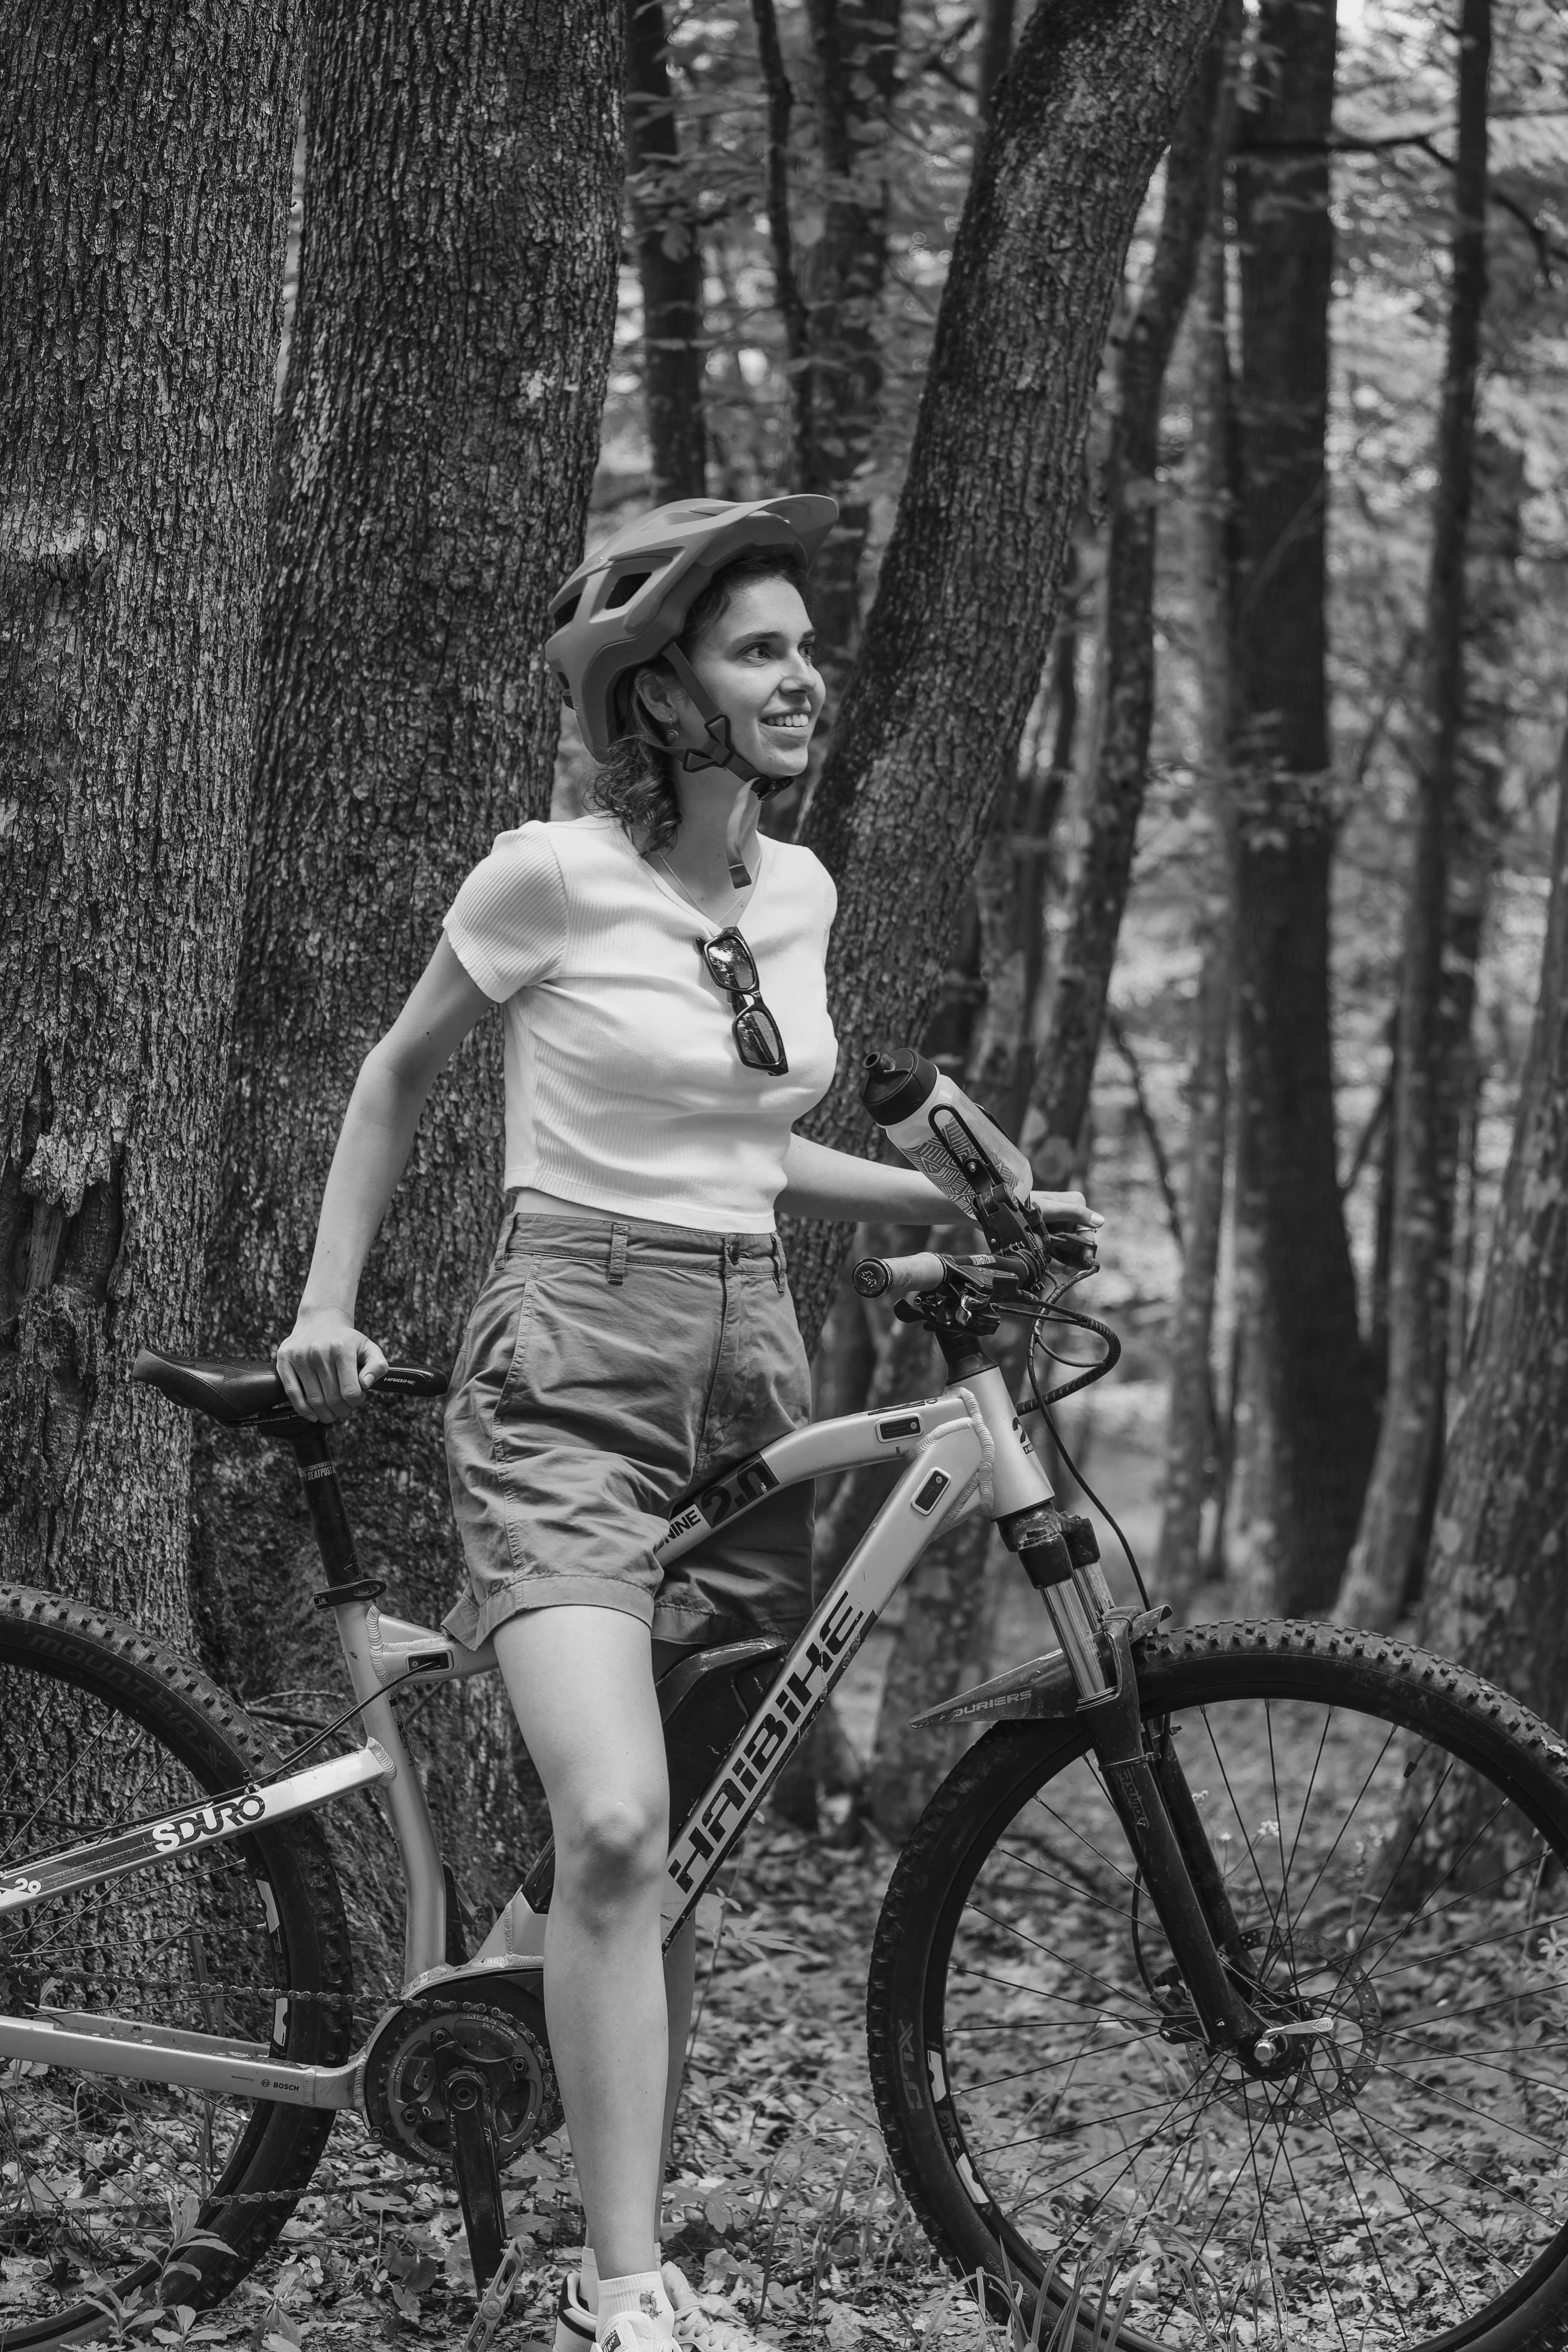 Slow Cyclist in a Transylvanian forest